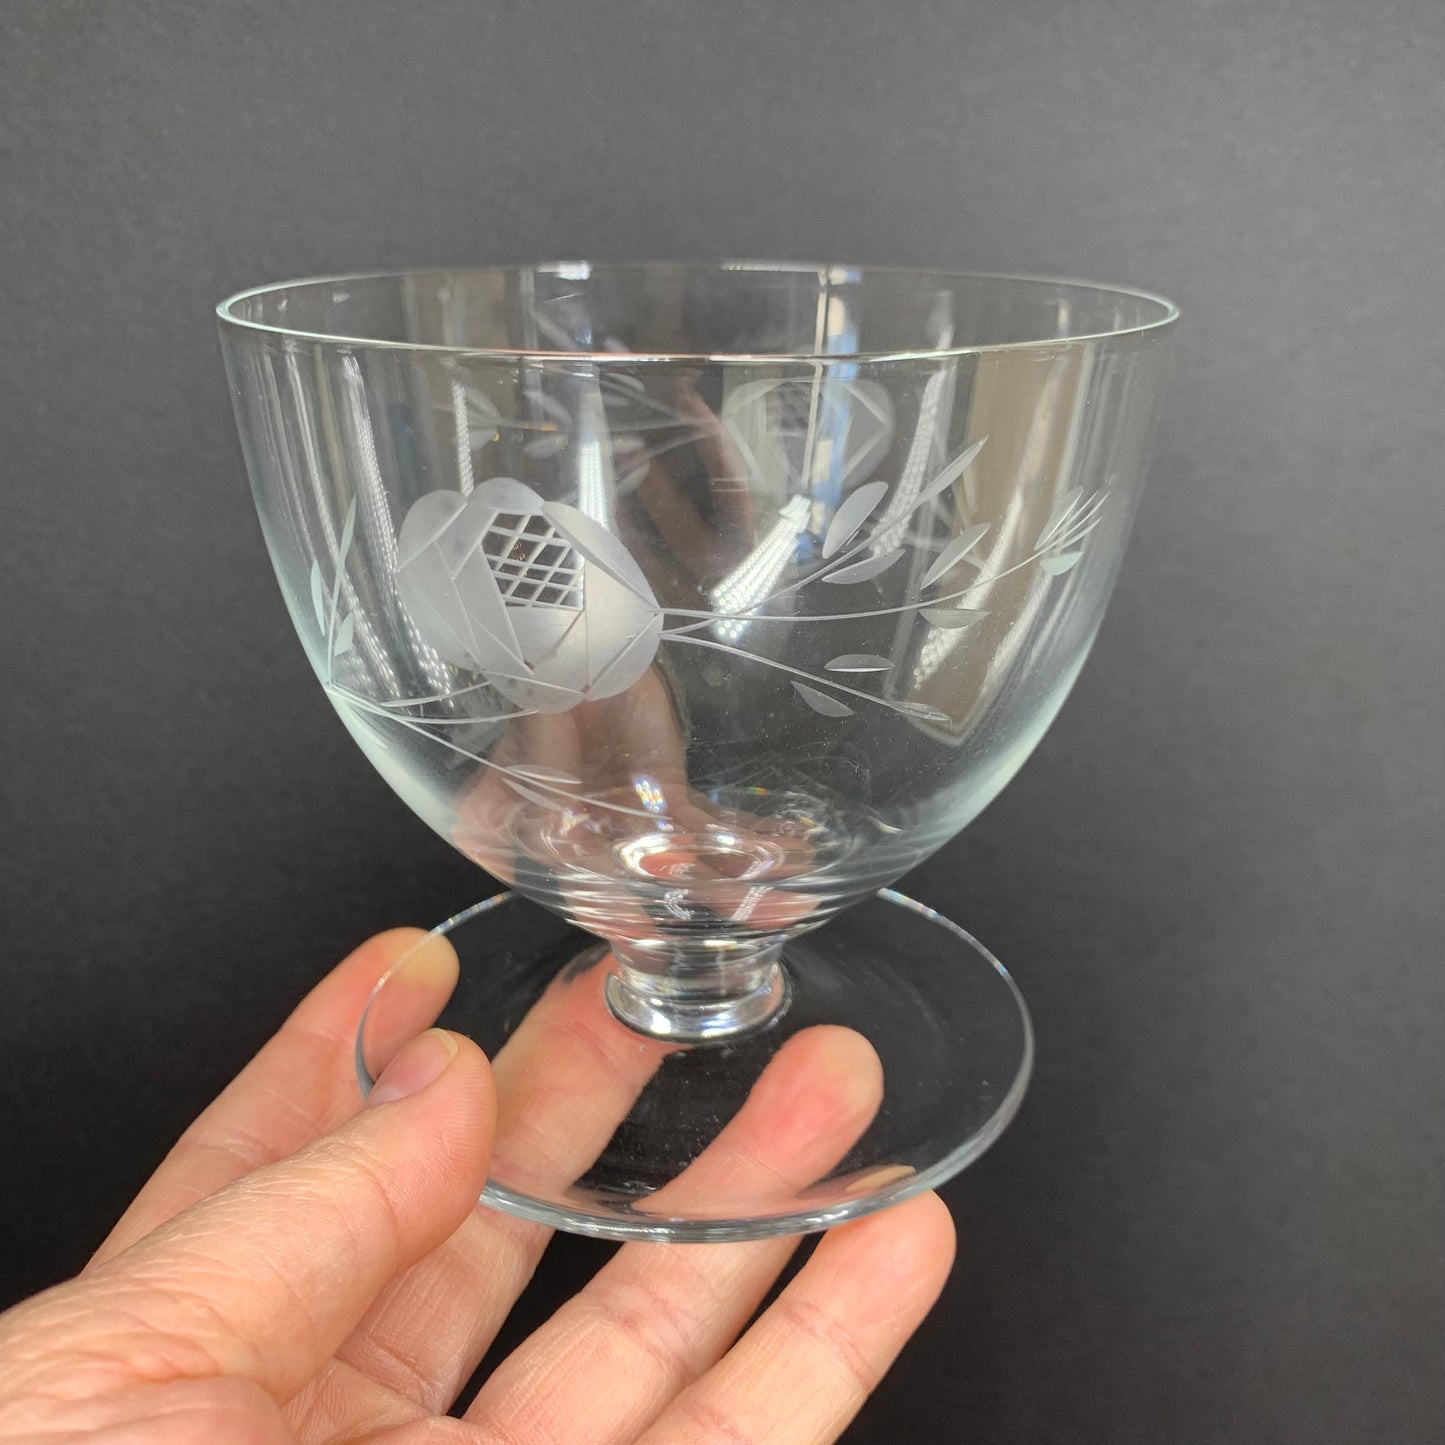 Rare 1940s hand etched rose pattern glass dessert coupe